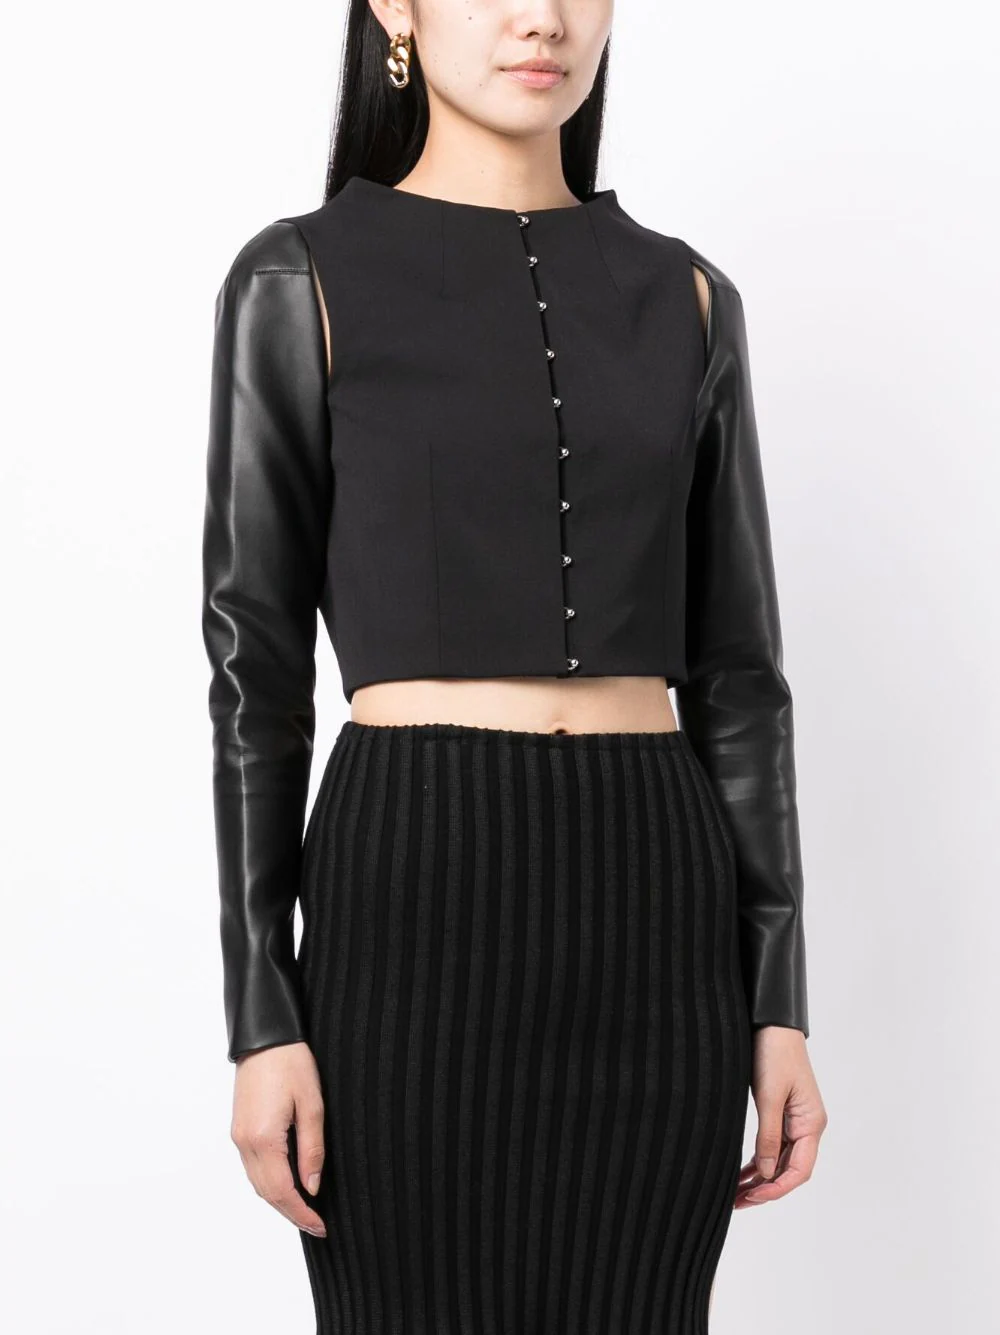 Del-Core-Tailored-Top-With-Leather-Sleeve-Black-3